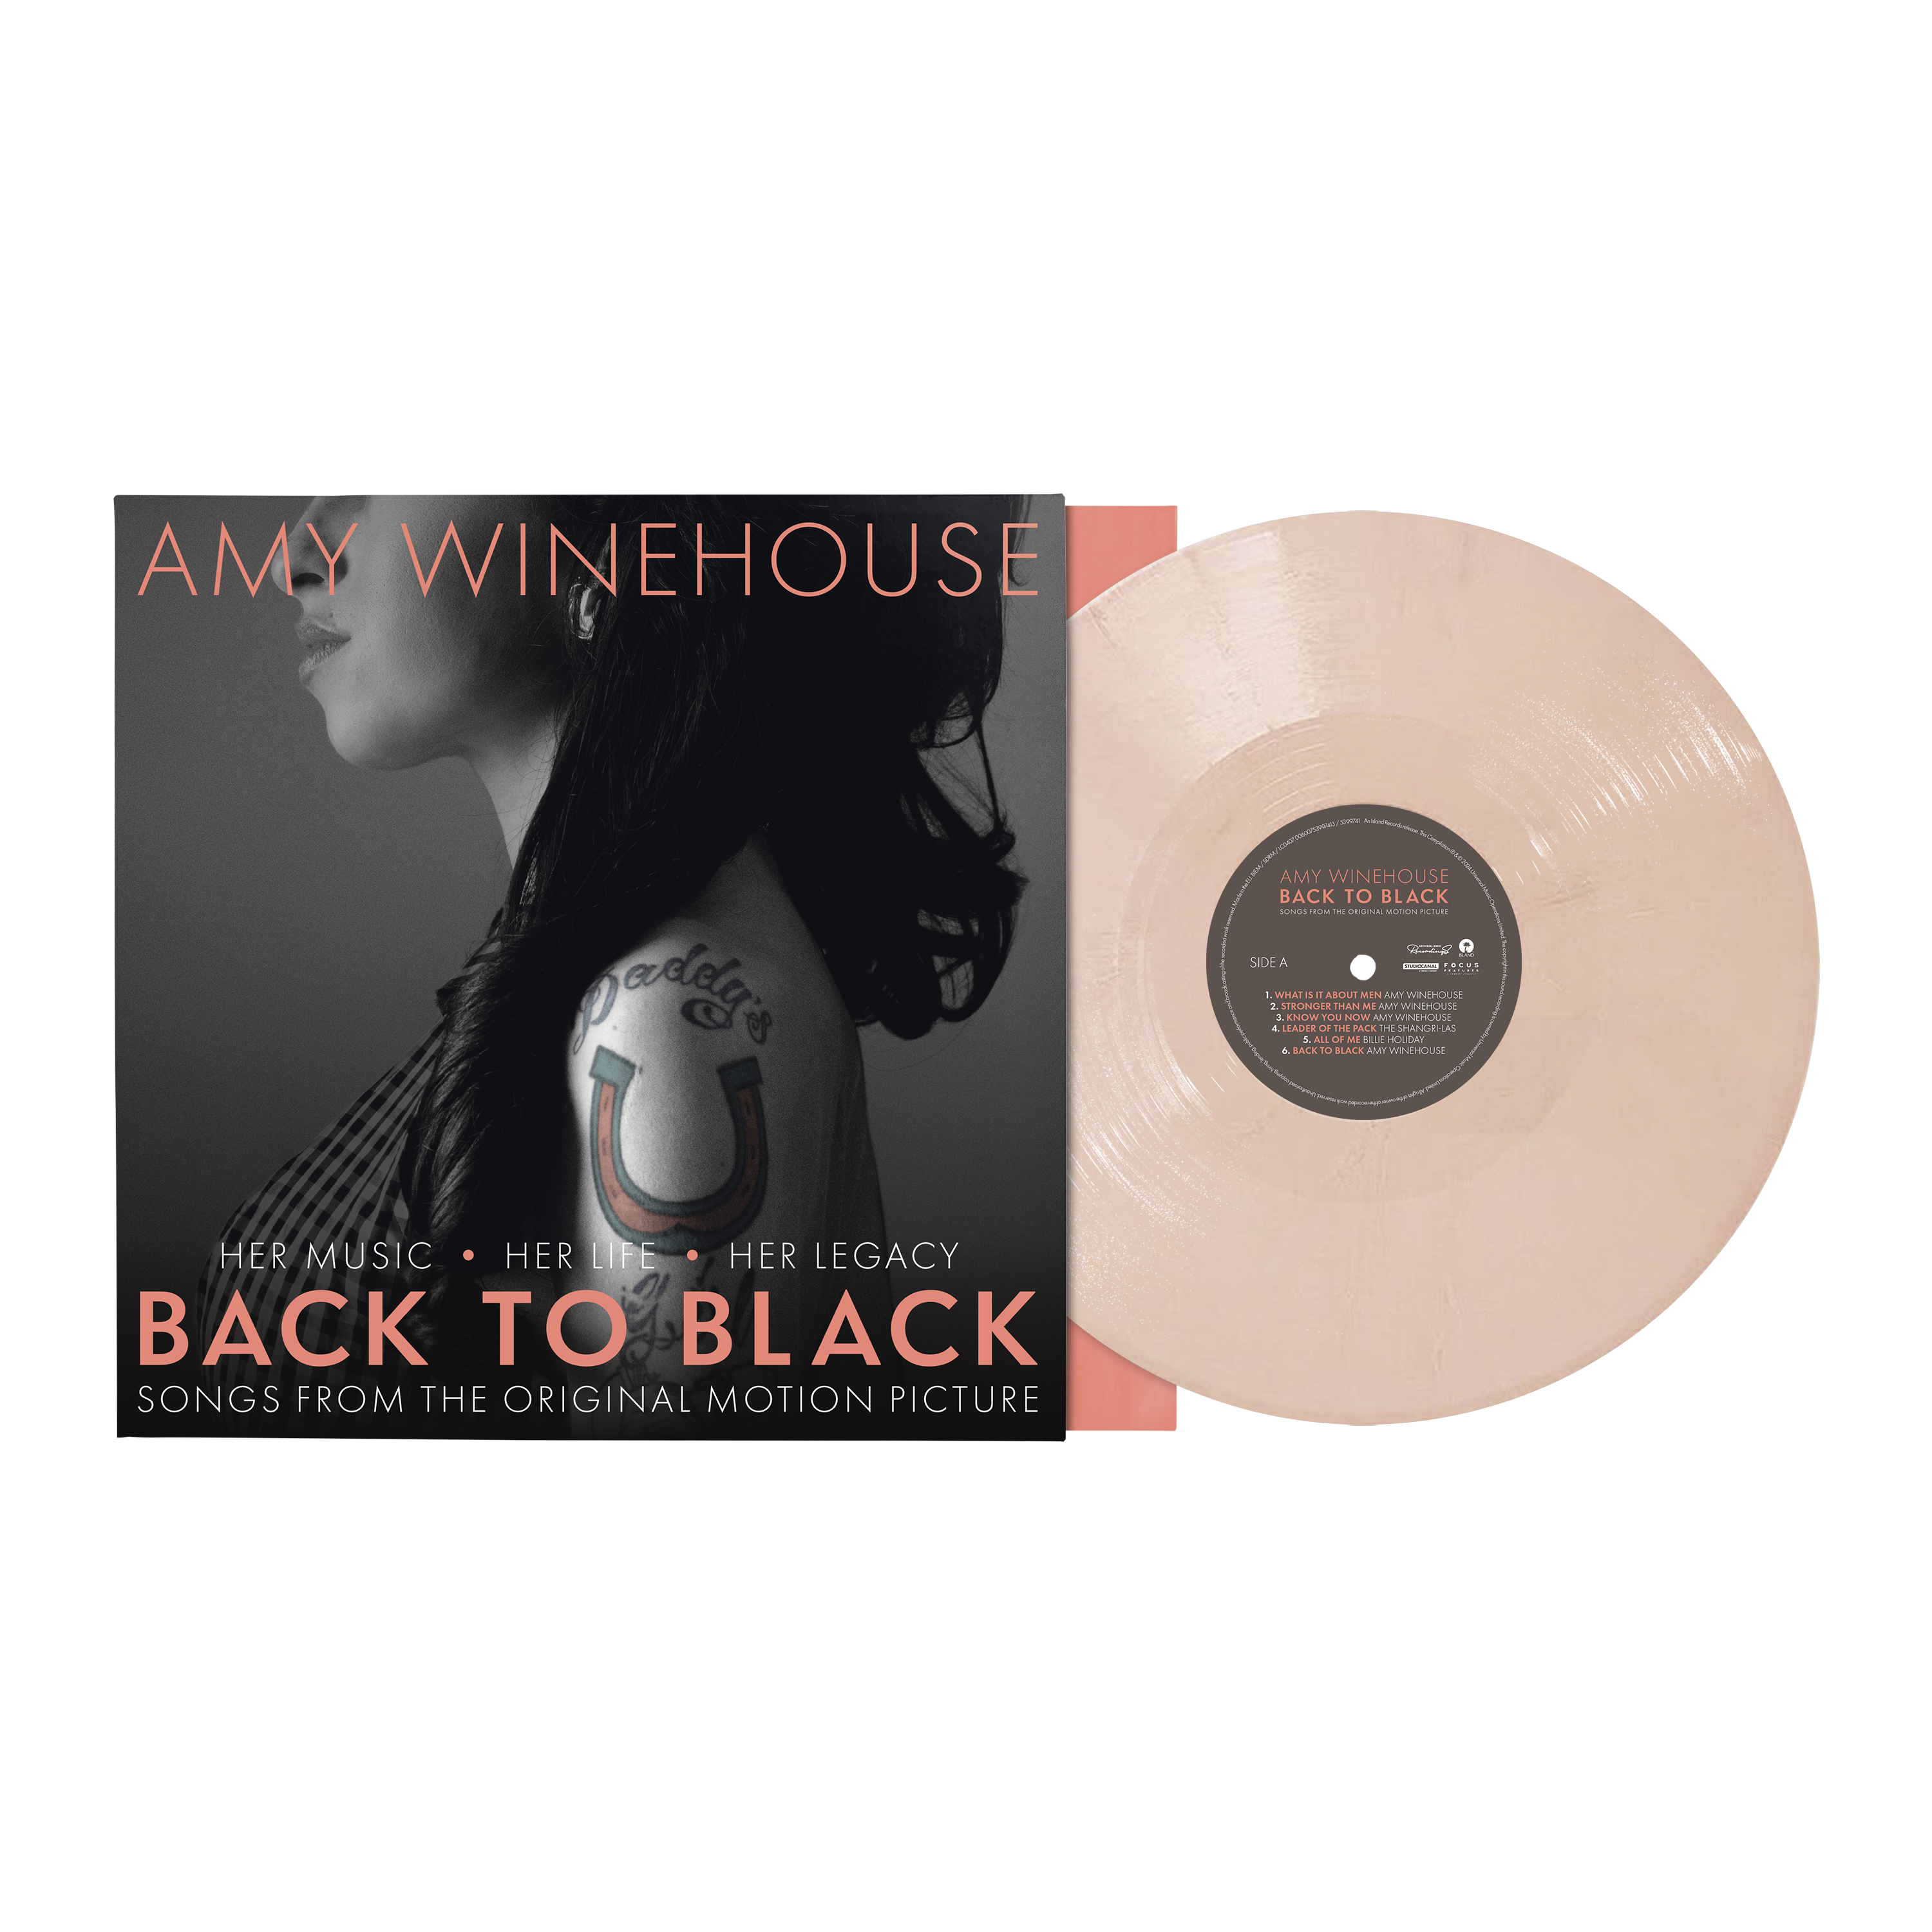 Original Soundtrack - Back To Black - Songs from the Original Motion Picture: Exclusive Peach Vinyl LP